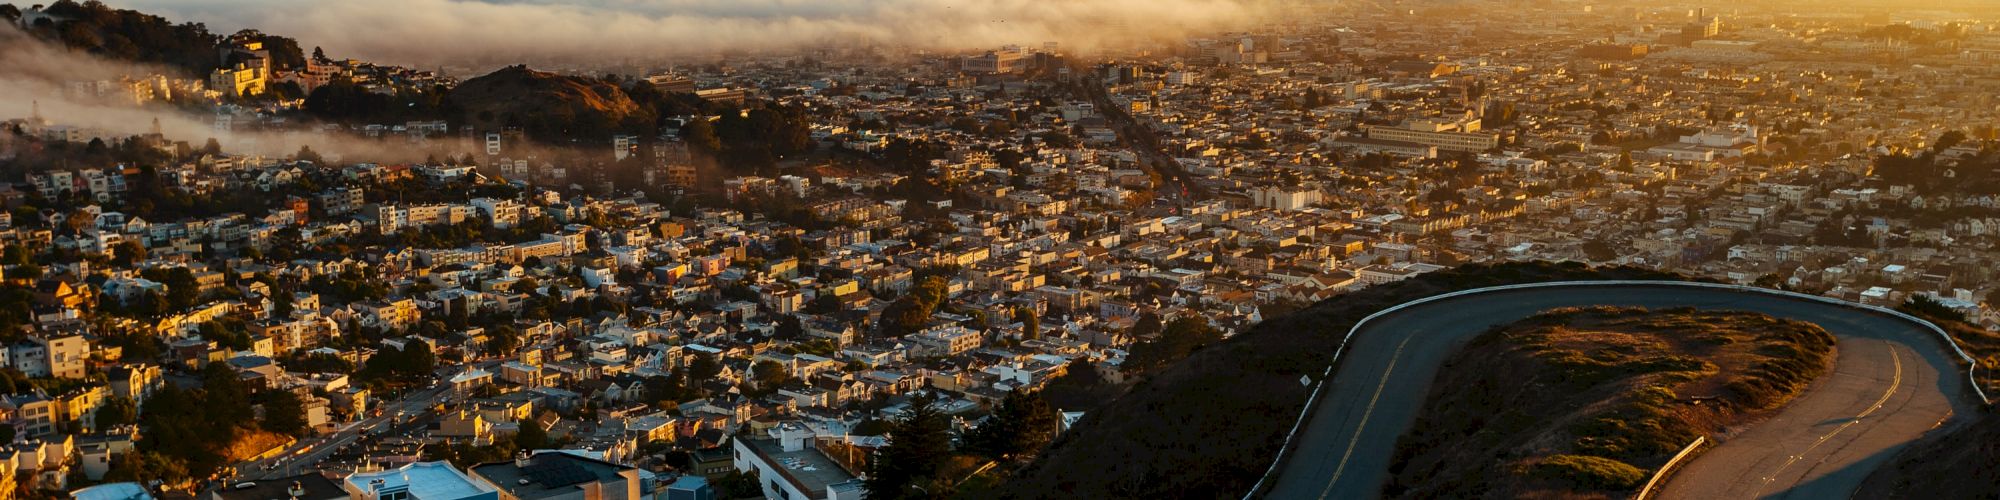 A panoramic view of a city with buildings, fog covering parts of the skyline, and a winding road leading down from a hill at sunrise or sunset.